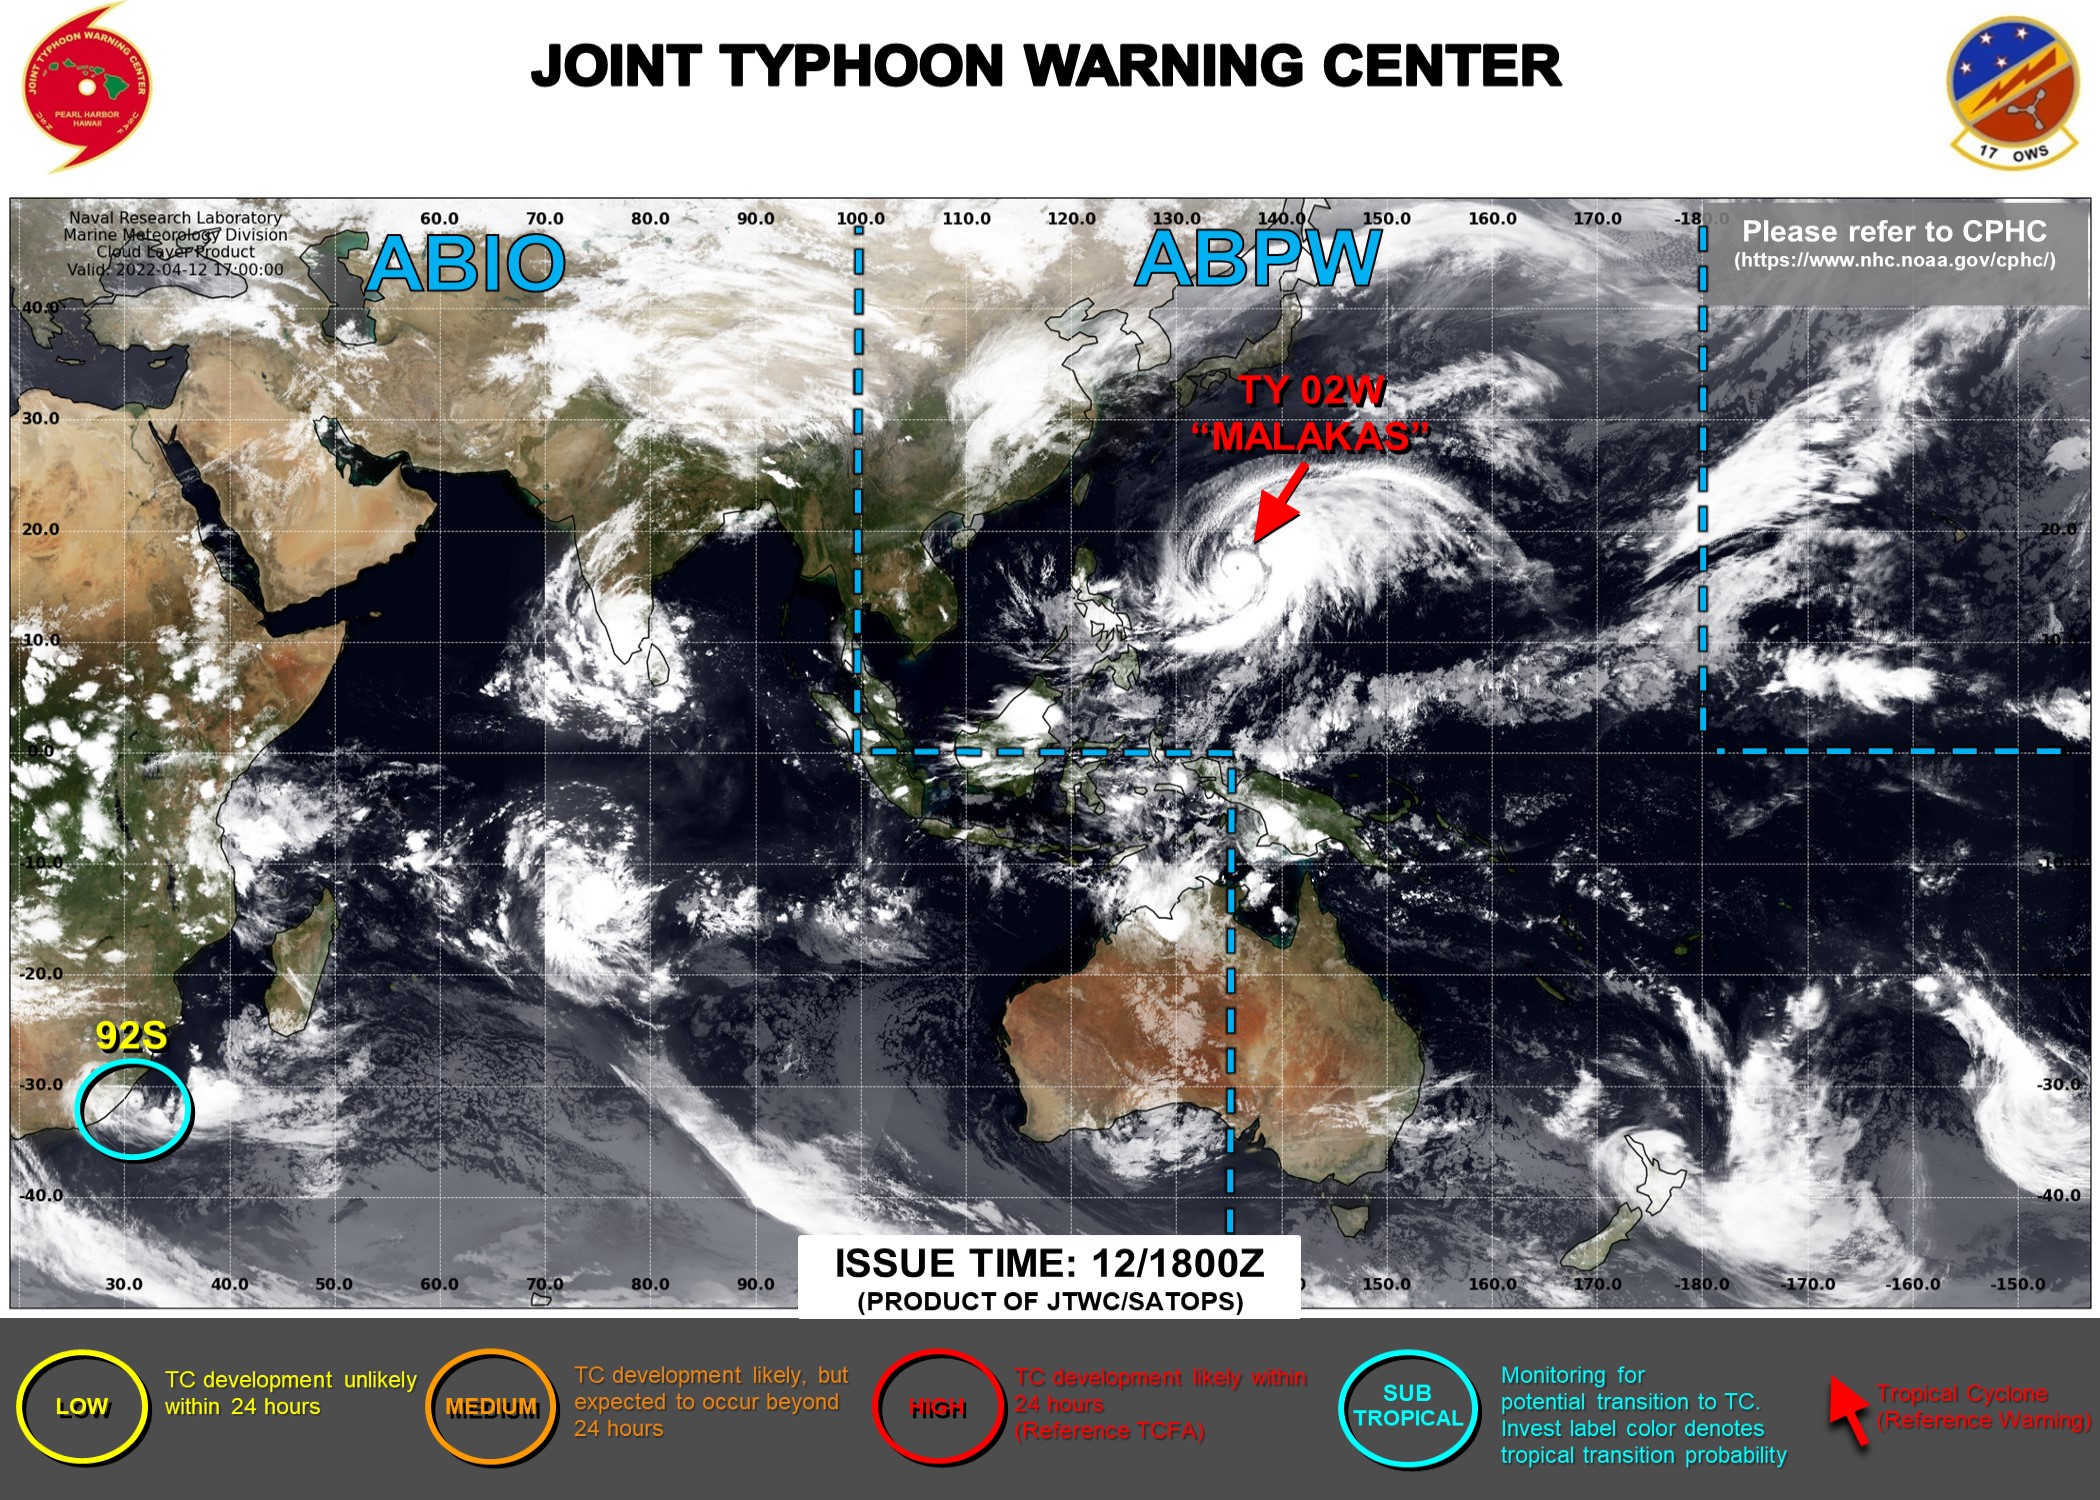 JTWC IS ISSUING 6HOURLY WARNINGS ON TY 02W(MALAKAS).3HOURLY SATELLITE BULLETINS ARE ISSUED ON 02W, THE REMNANTS OF 03W ANDON INVEST 92S.